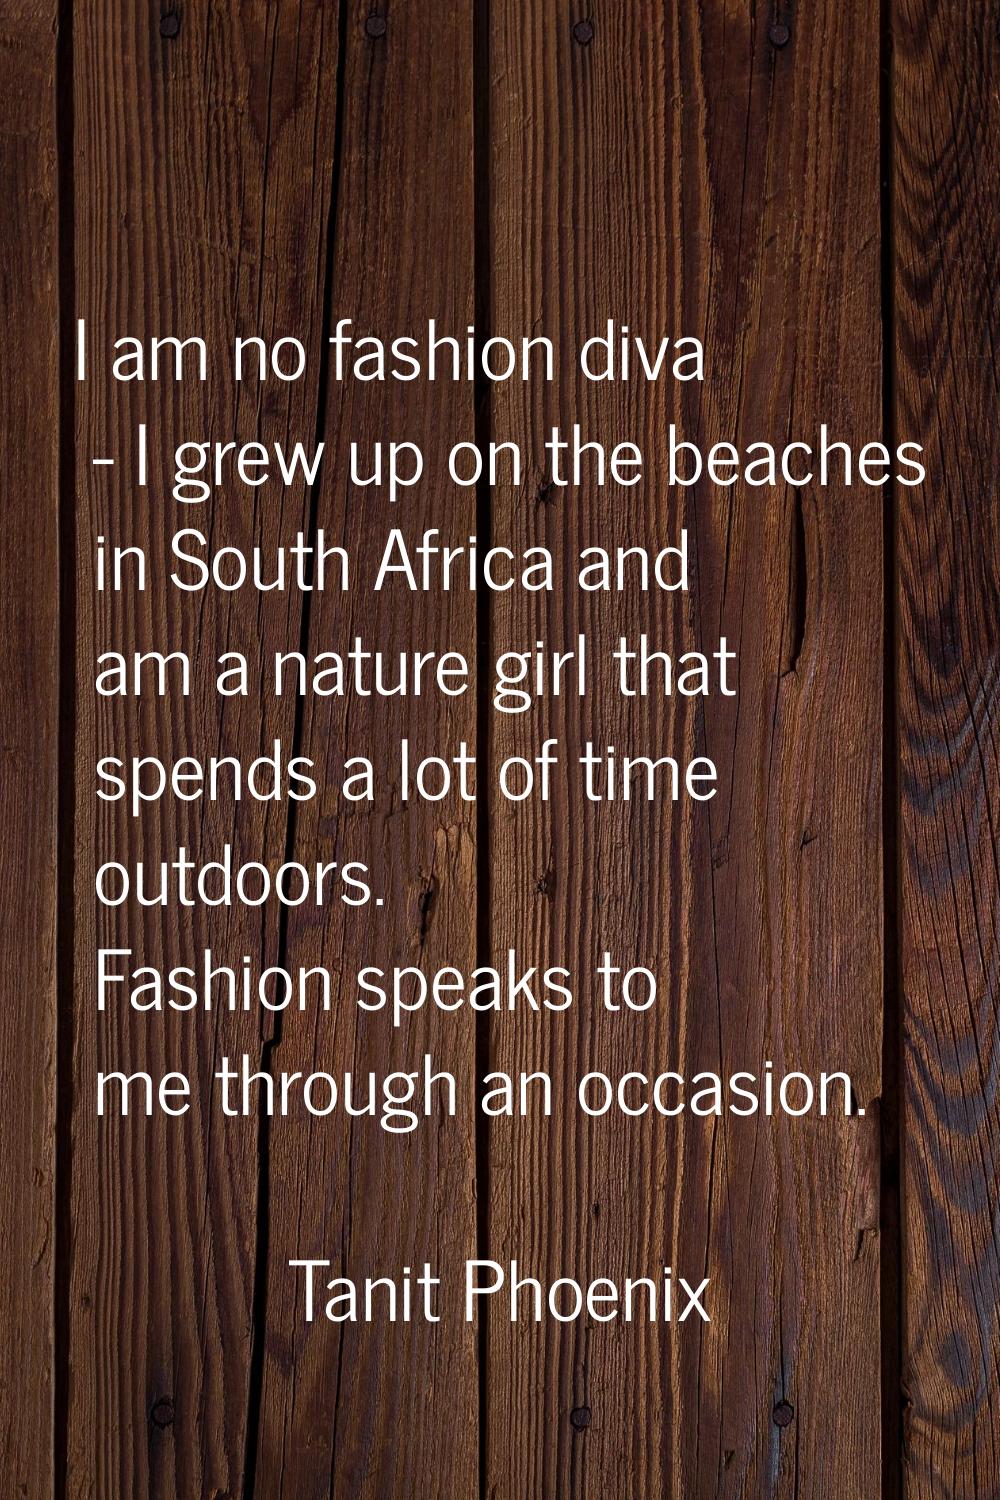 I am no fashion diva - I grew up on the beaches in South Africa and am a nature girl that spends a 